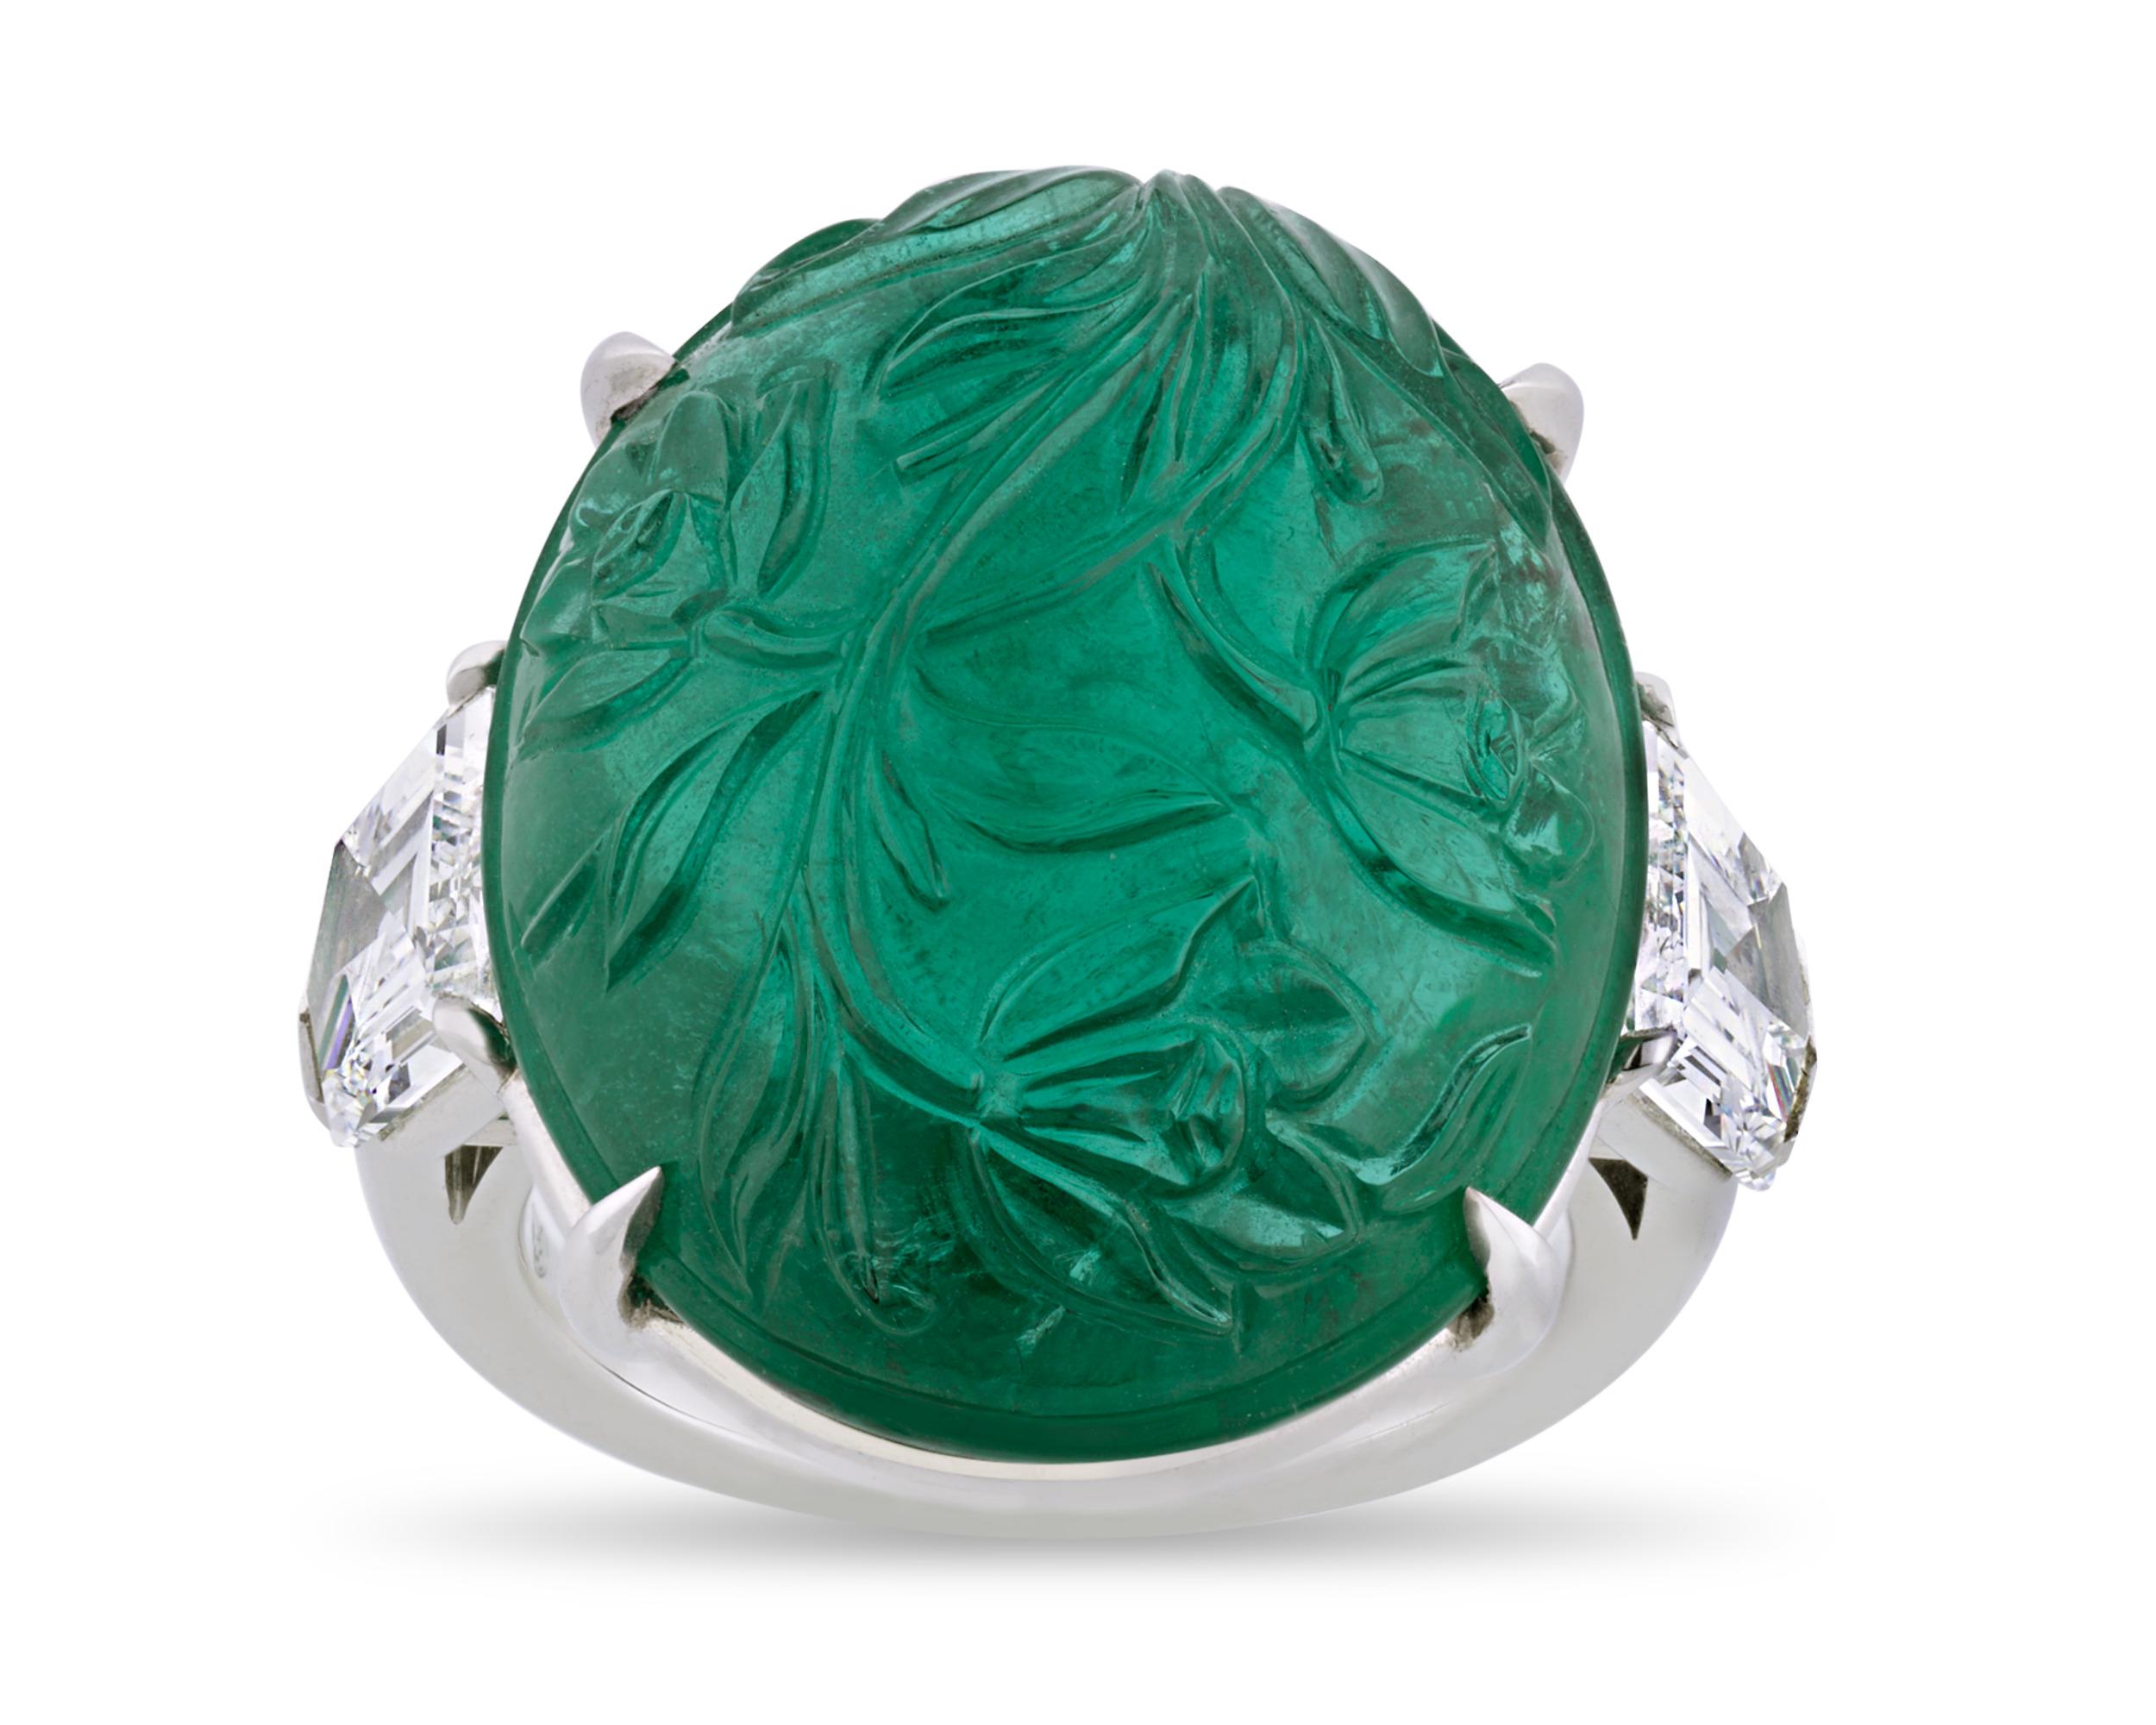 This ring possesses a stunning example of the ancient and complex art of gem engraving. Intricately carved in a rich floral design in the Mughal taste, the impressive 24.05-carat emerald in this ring is certified by C. Dunaigre. Emeralds from Zambia